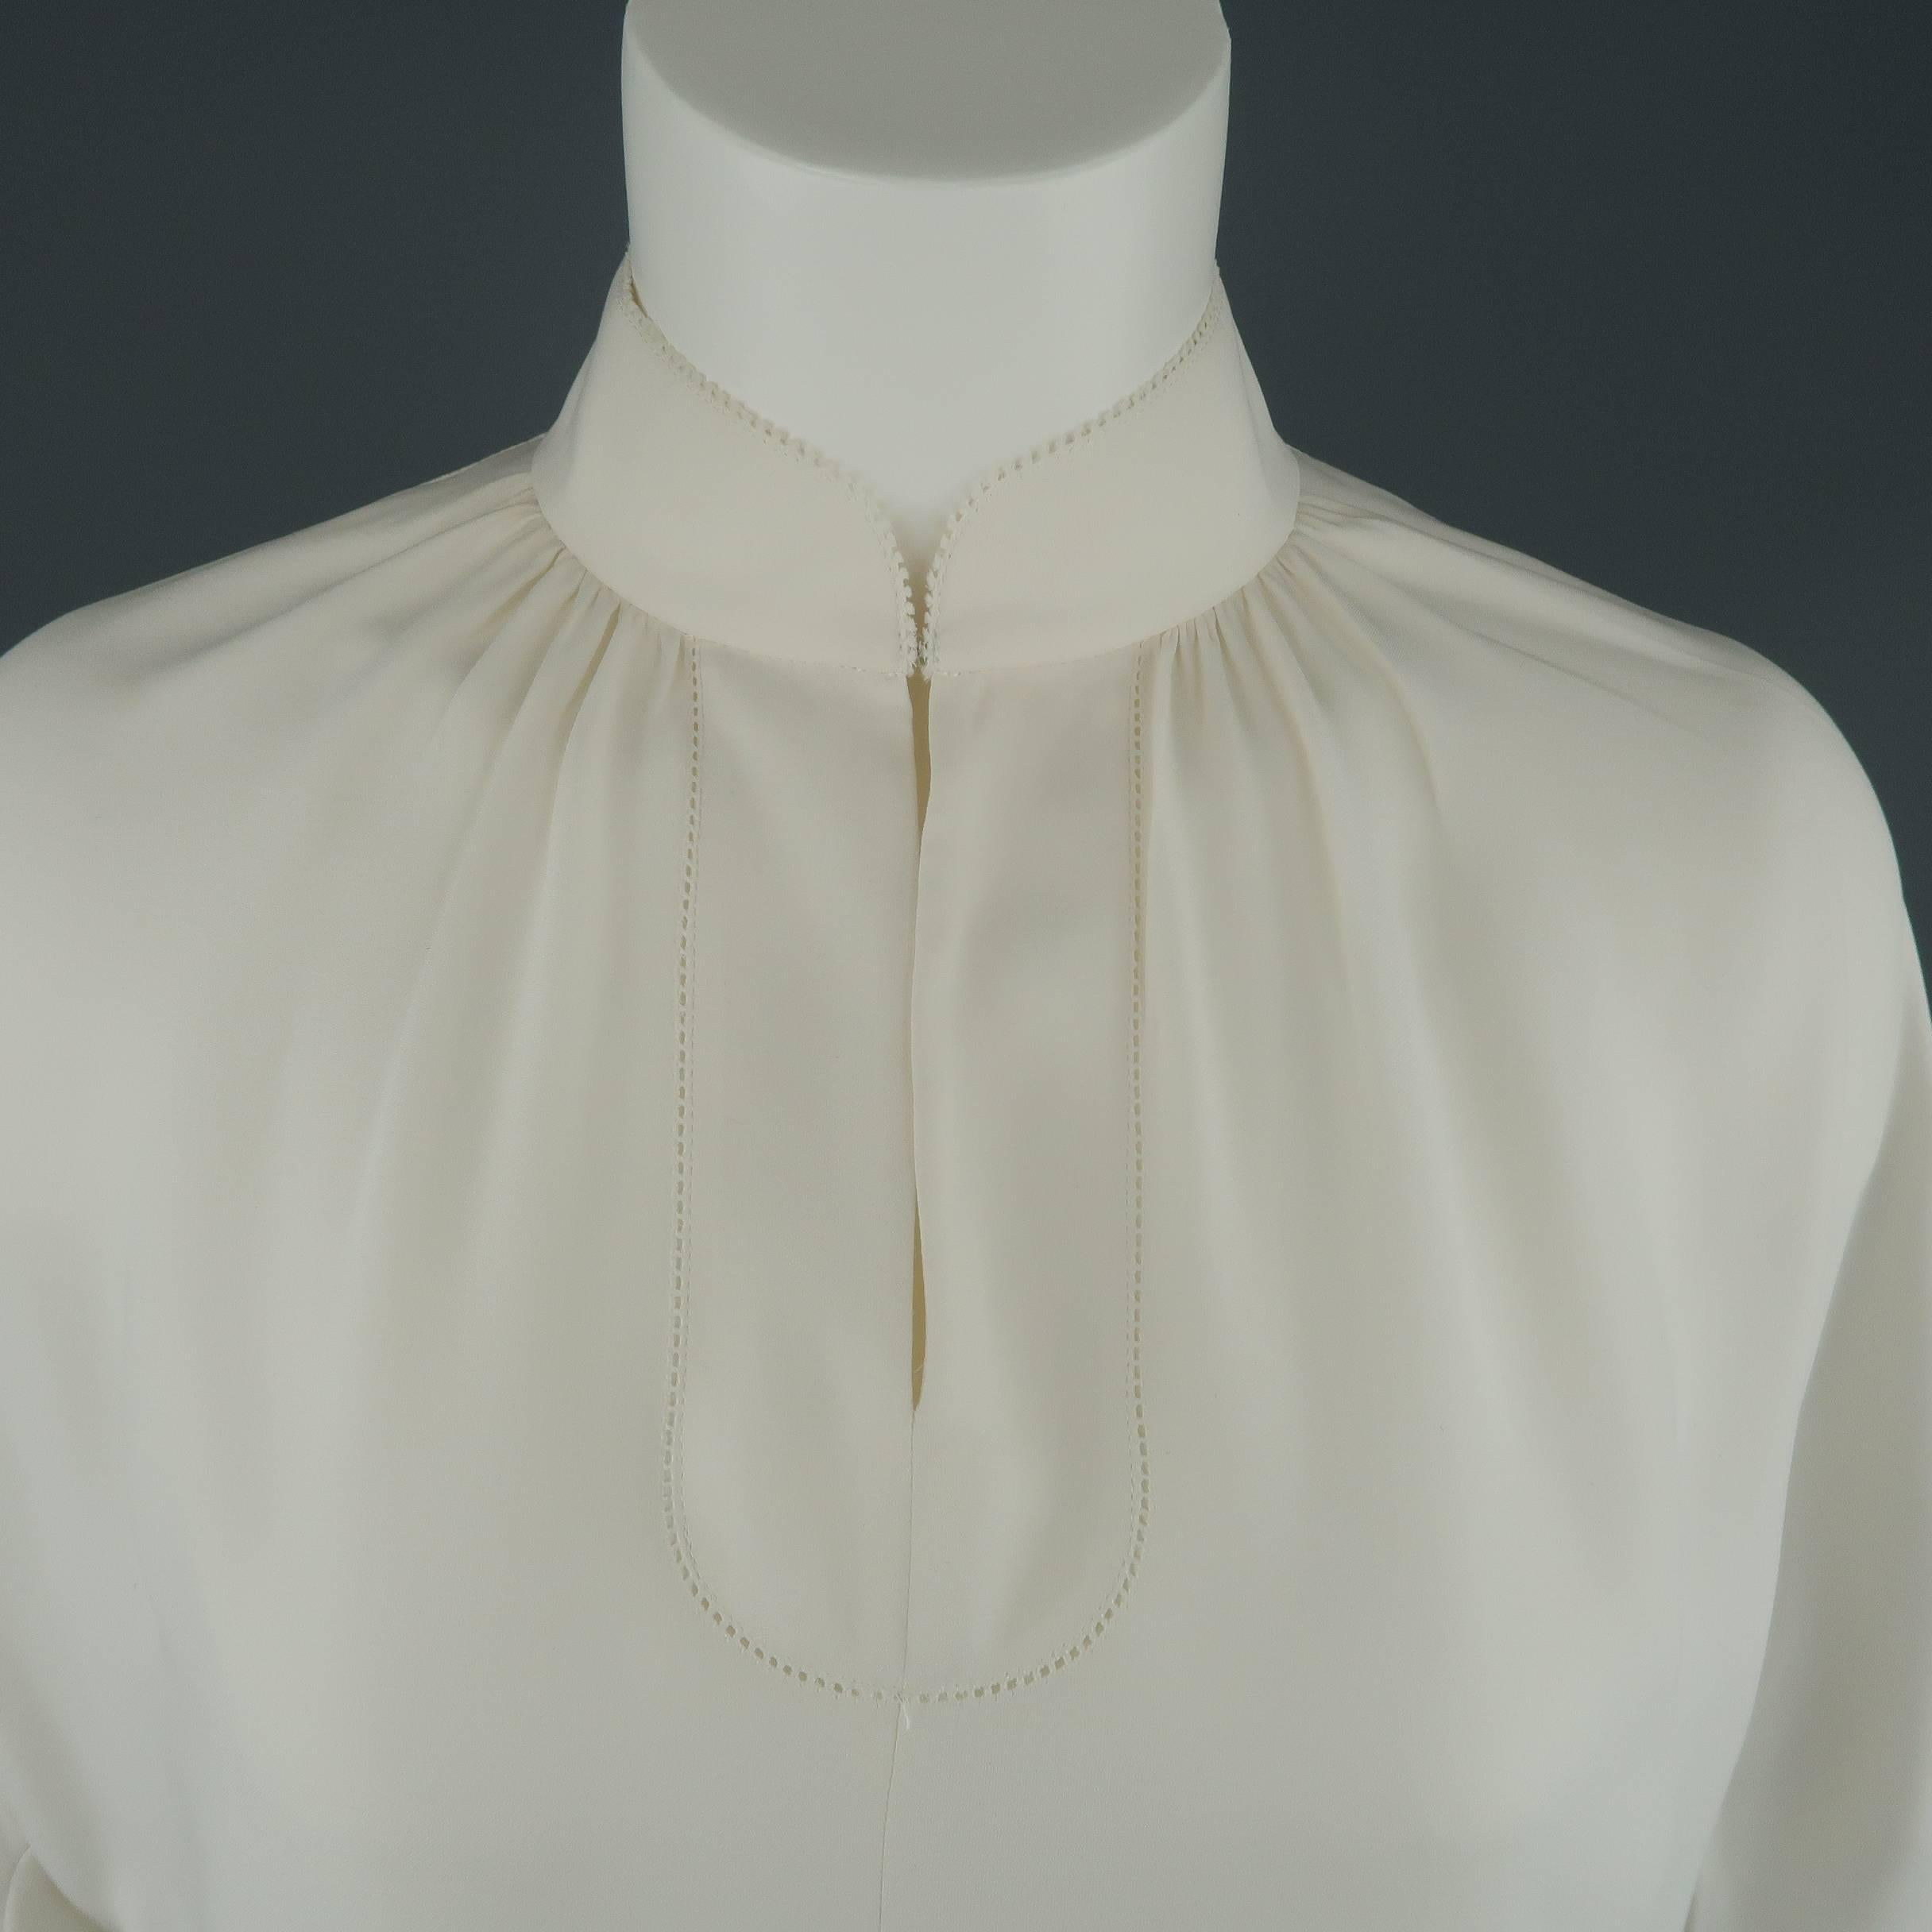 SHANGHAI TANG tunic comes in white silk with a Mandarin collar, gathered top, A line silhouette, and lace trim three quarter sleeves.
 
Excellent Pre-Owned Condition.
Marked: 6
 
Measurements:
 
Shoulder: 16 in.
Bust: 46 in.
Sleeve: 20 in.
Length: